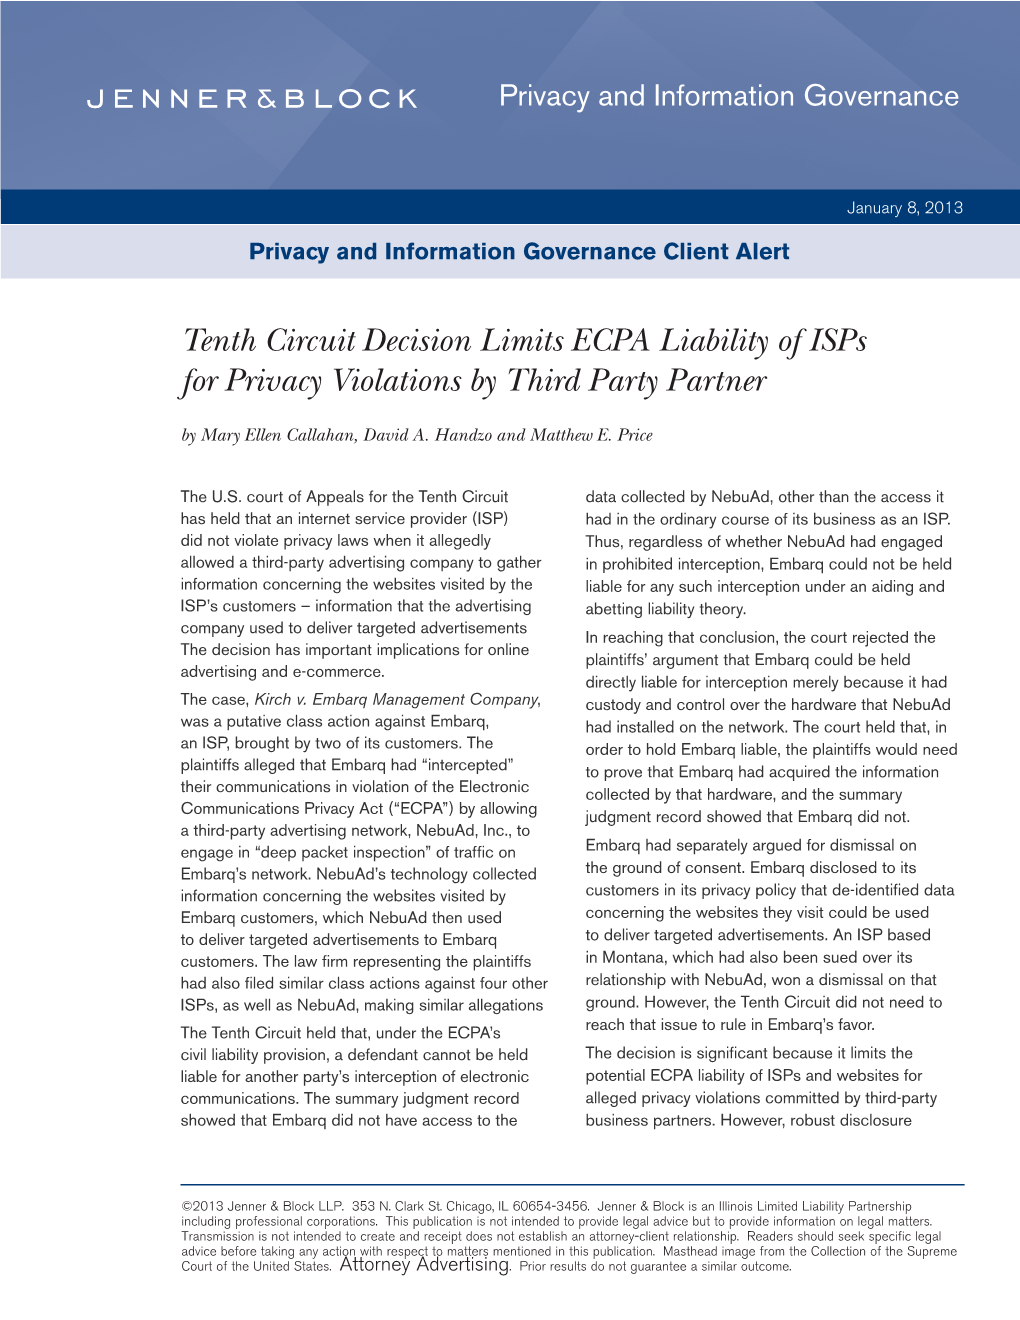 Tenth Circuit Decision Limits ECPA Liability of Isps for Privacy Violations by Third Party Partner by Mary Ellen Callahan, David A